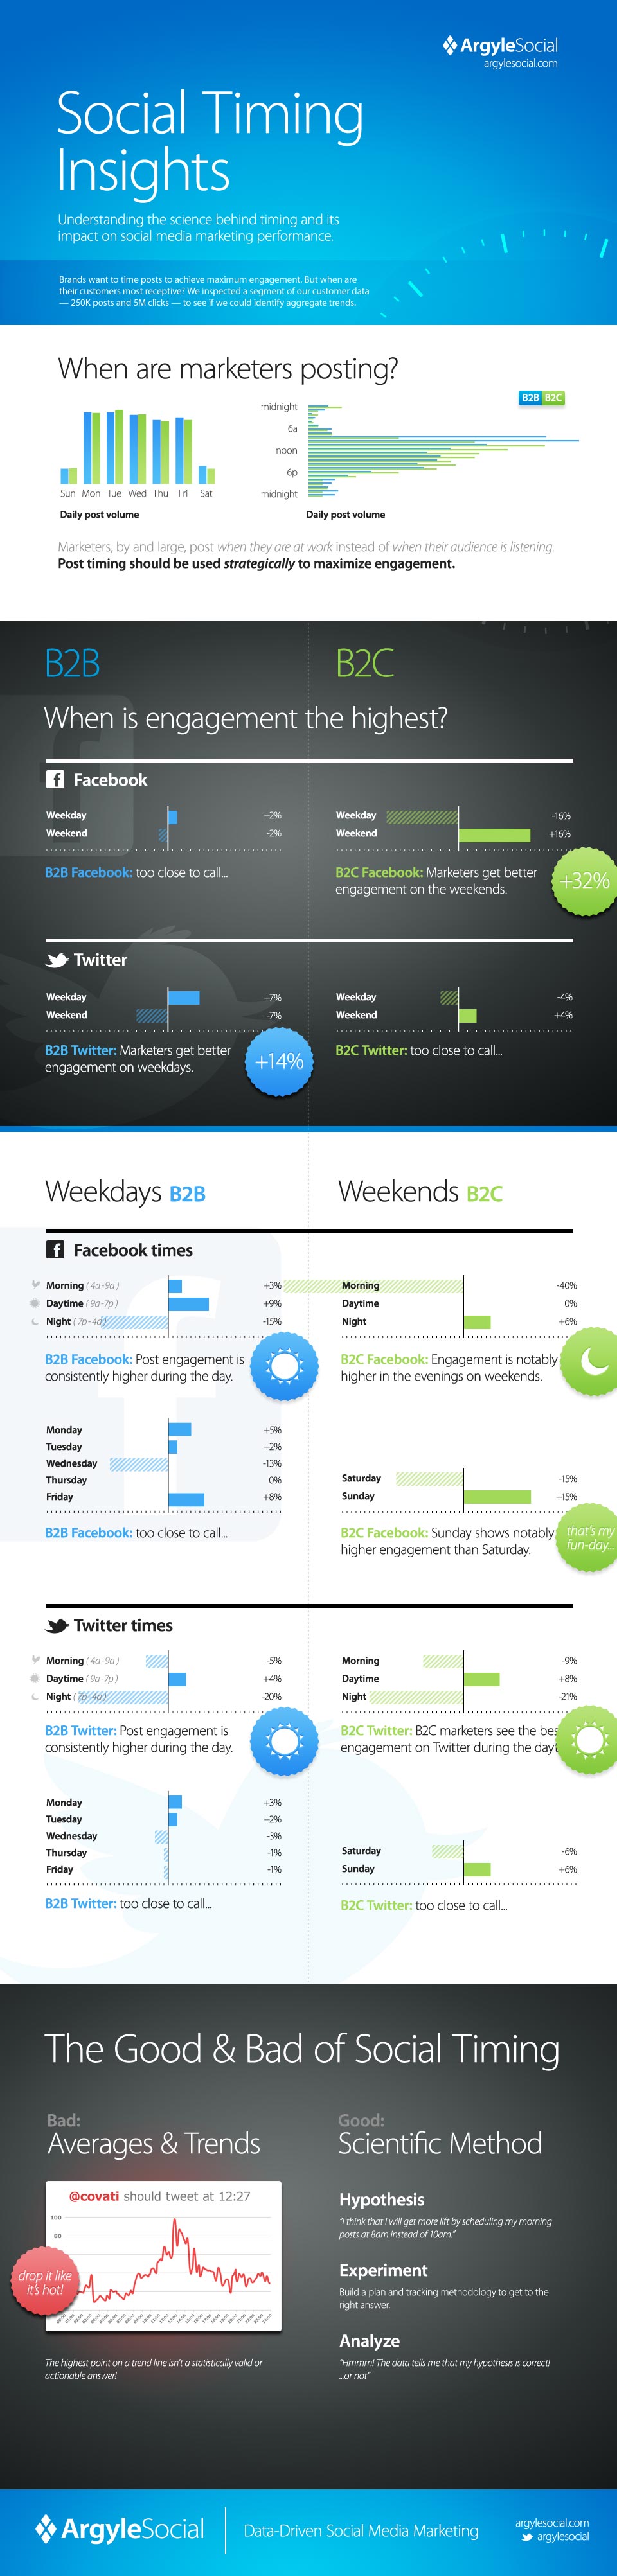  » Social Timing Insights Infographic | Argyle Social is on a mission to help marketers drive meaningful business outcomes through social media marketing.  Hundreds of small- and mid-sized businesses rely on our platform to power marketing campaigns on Twitter, Facebook, and LinkedIn.